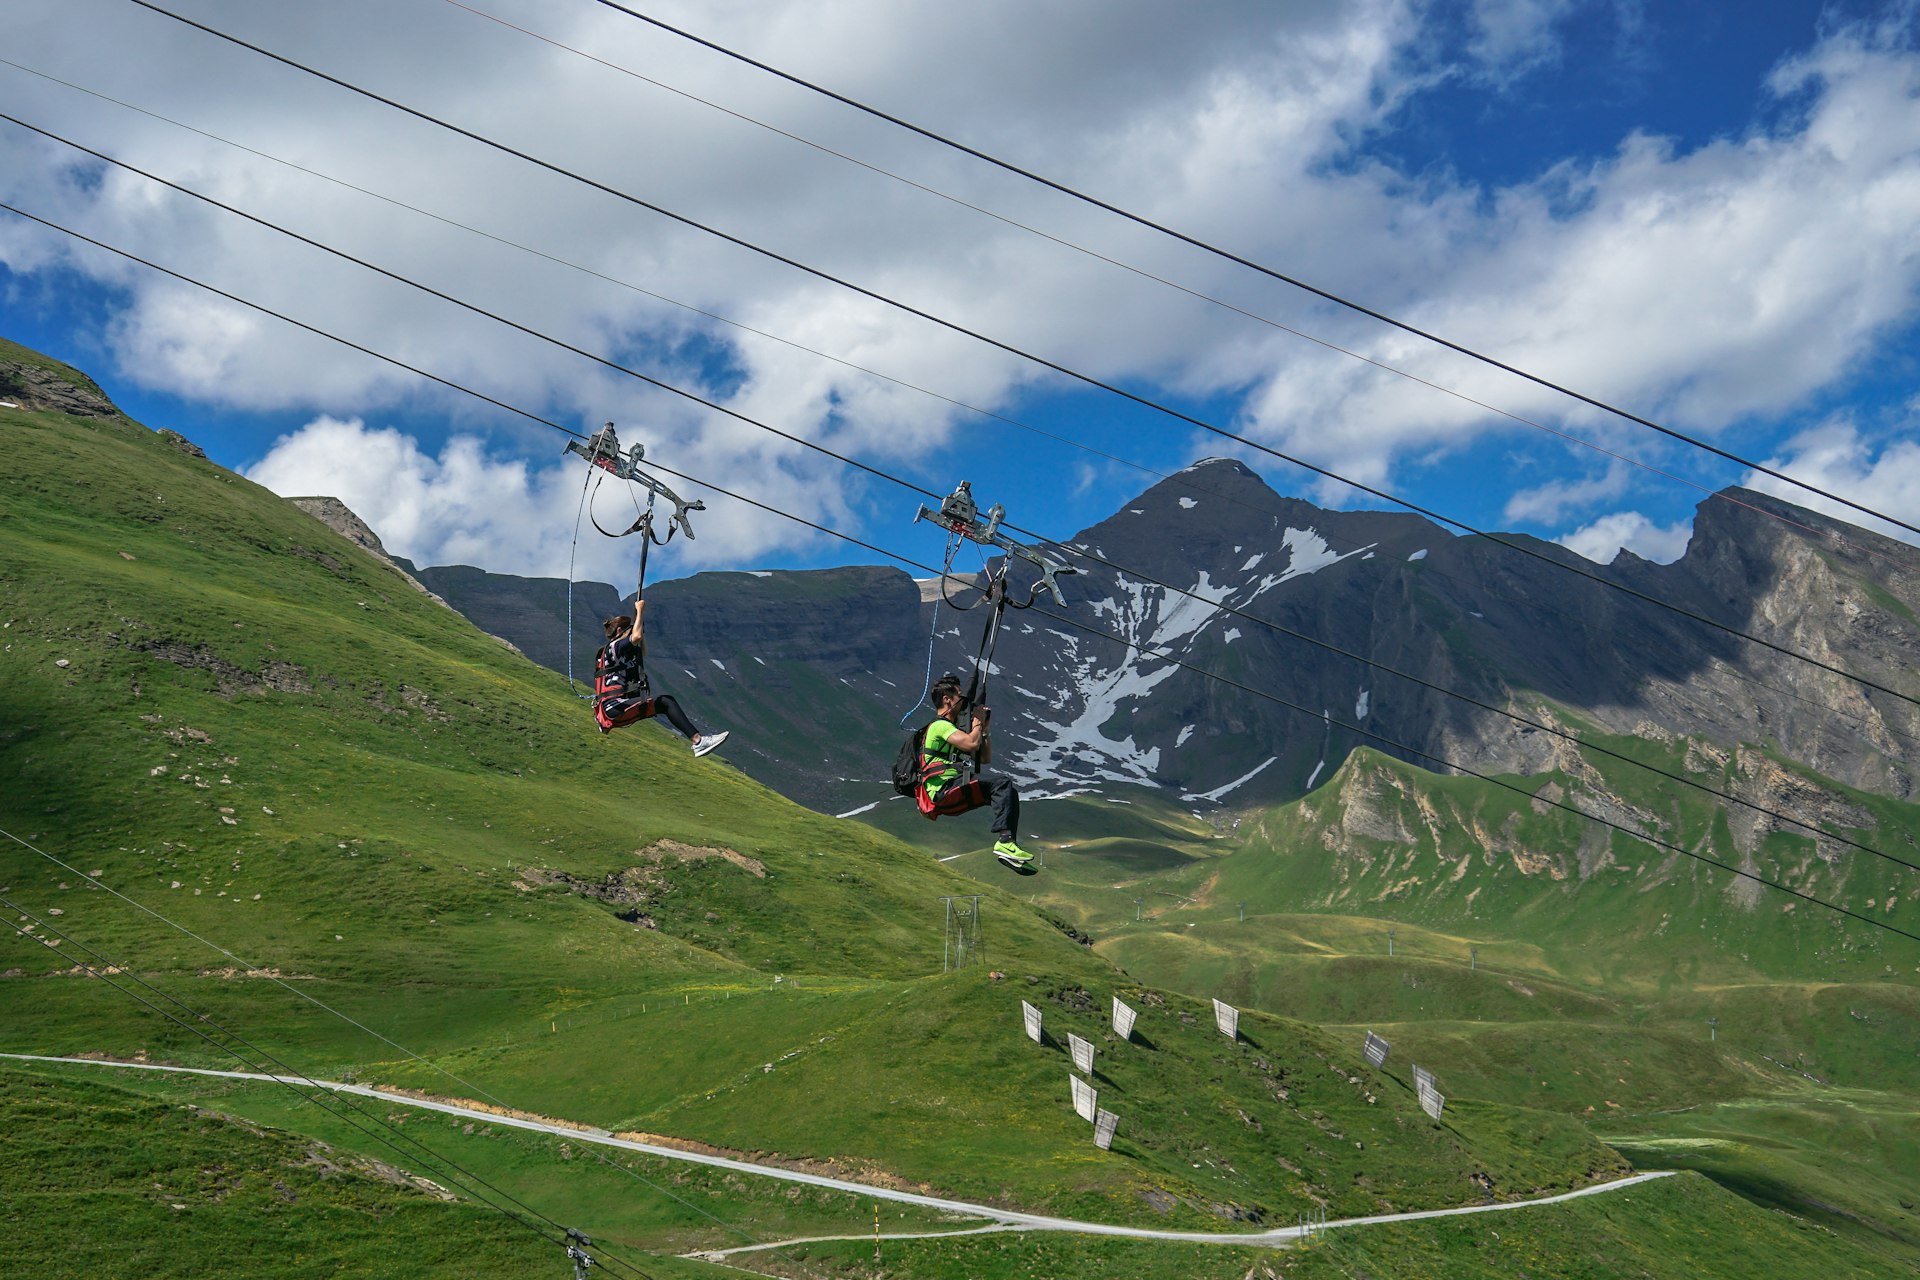 Two people on a zip line fly down a cable in a very moutainous area